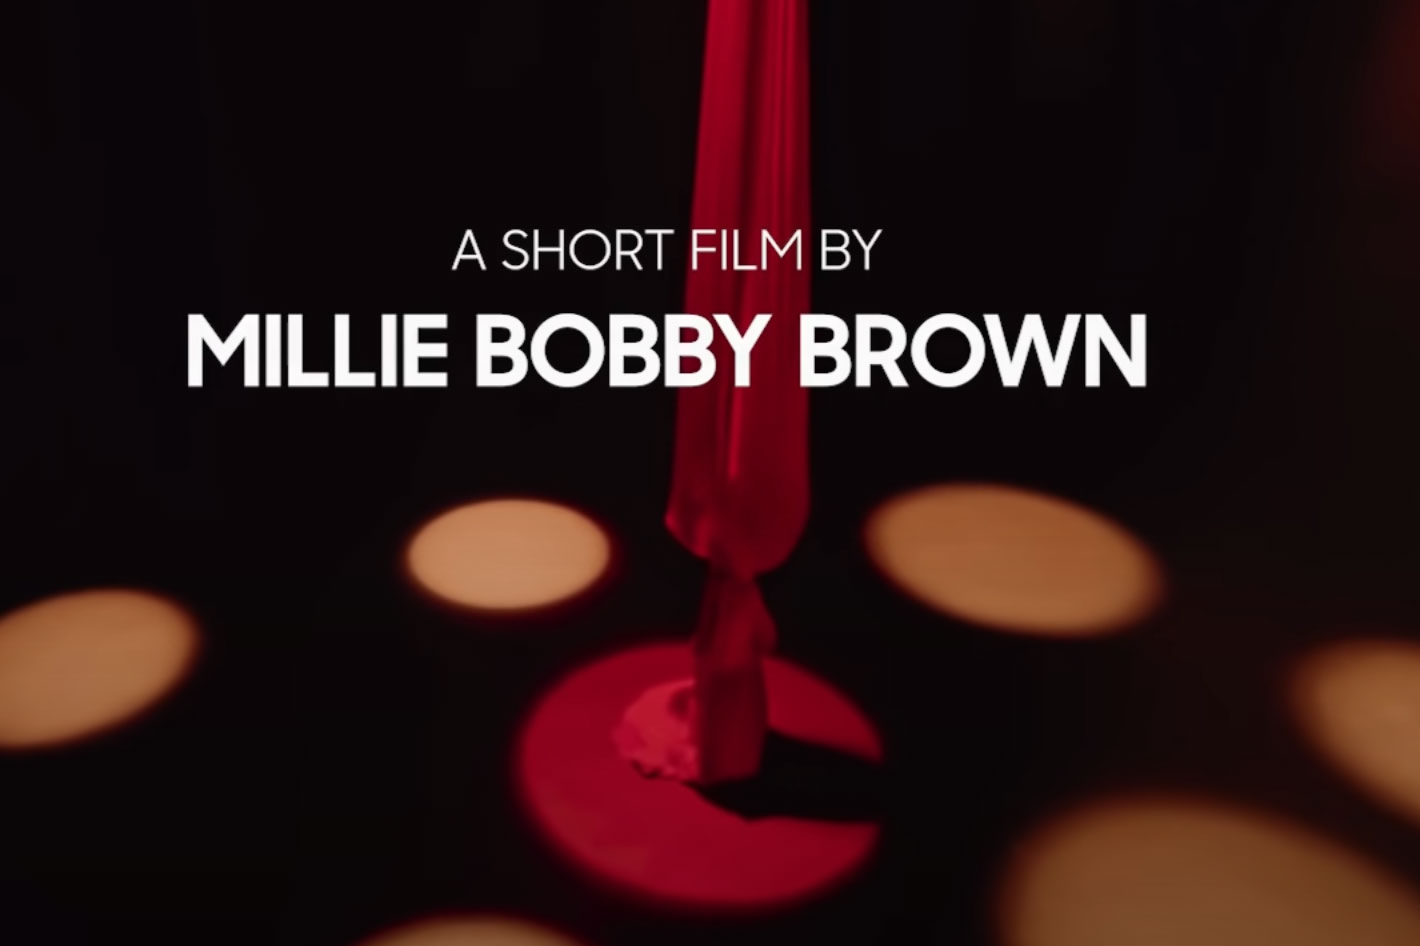 Millie Bobby Brown's short film: going behind the scenes